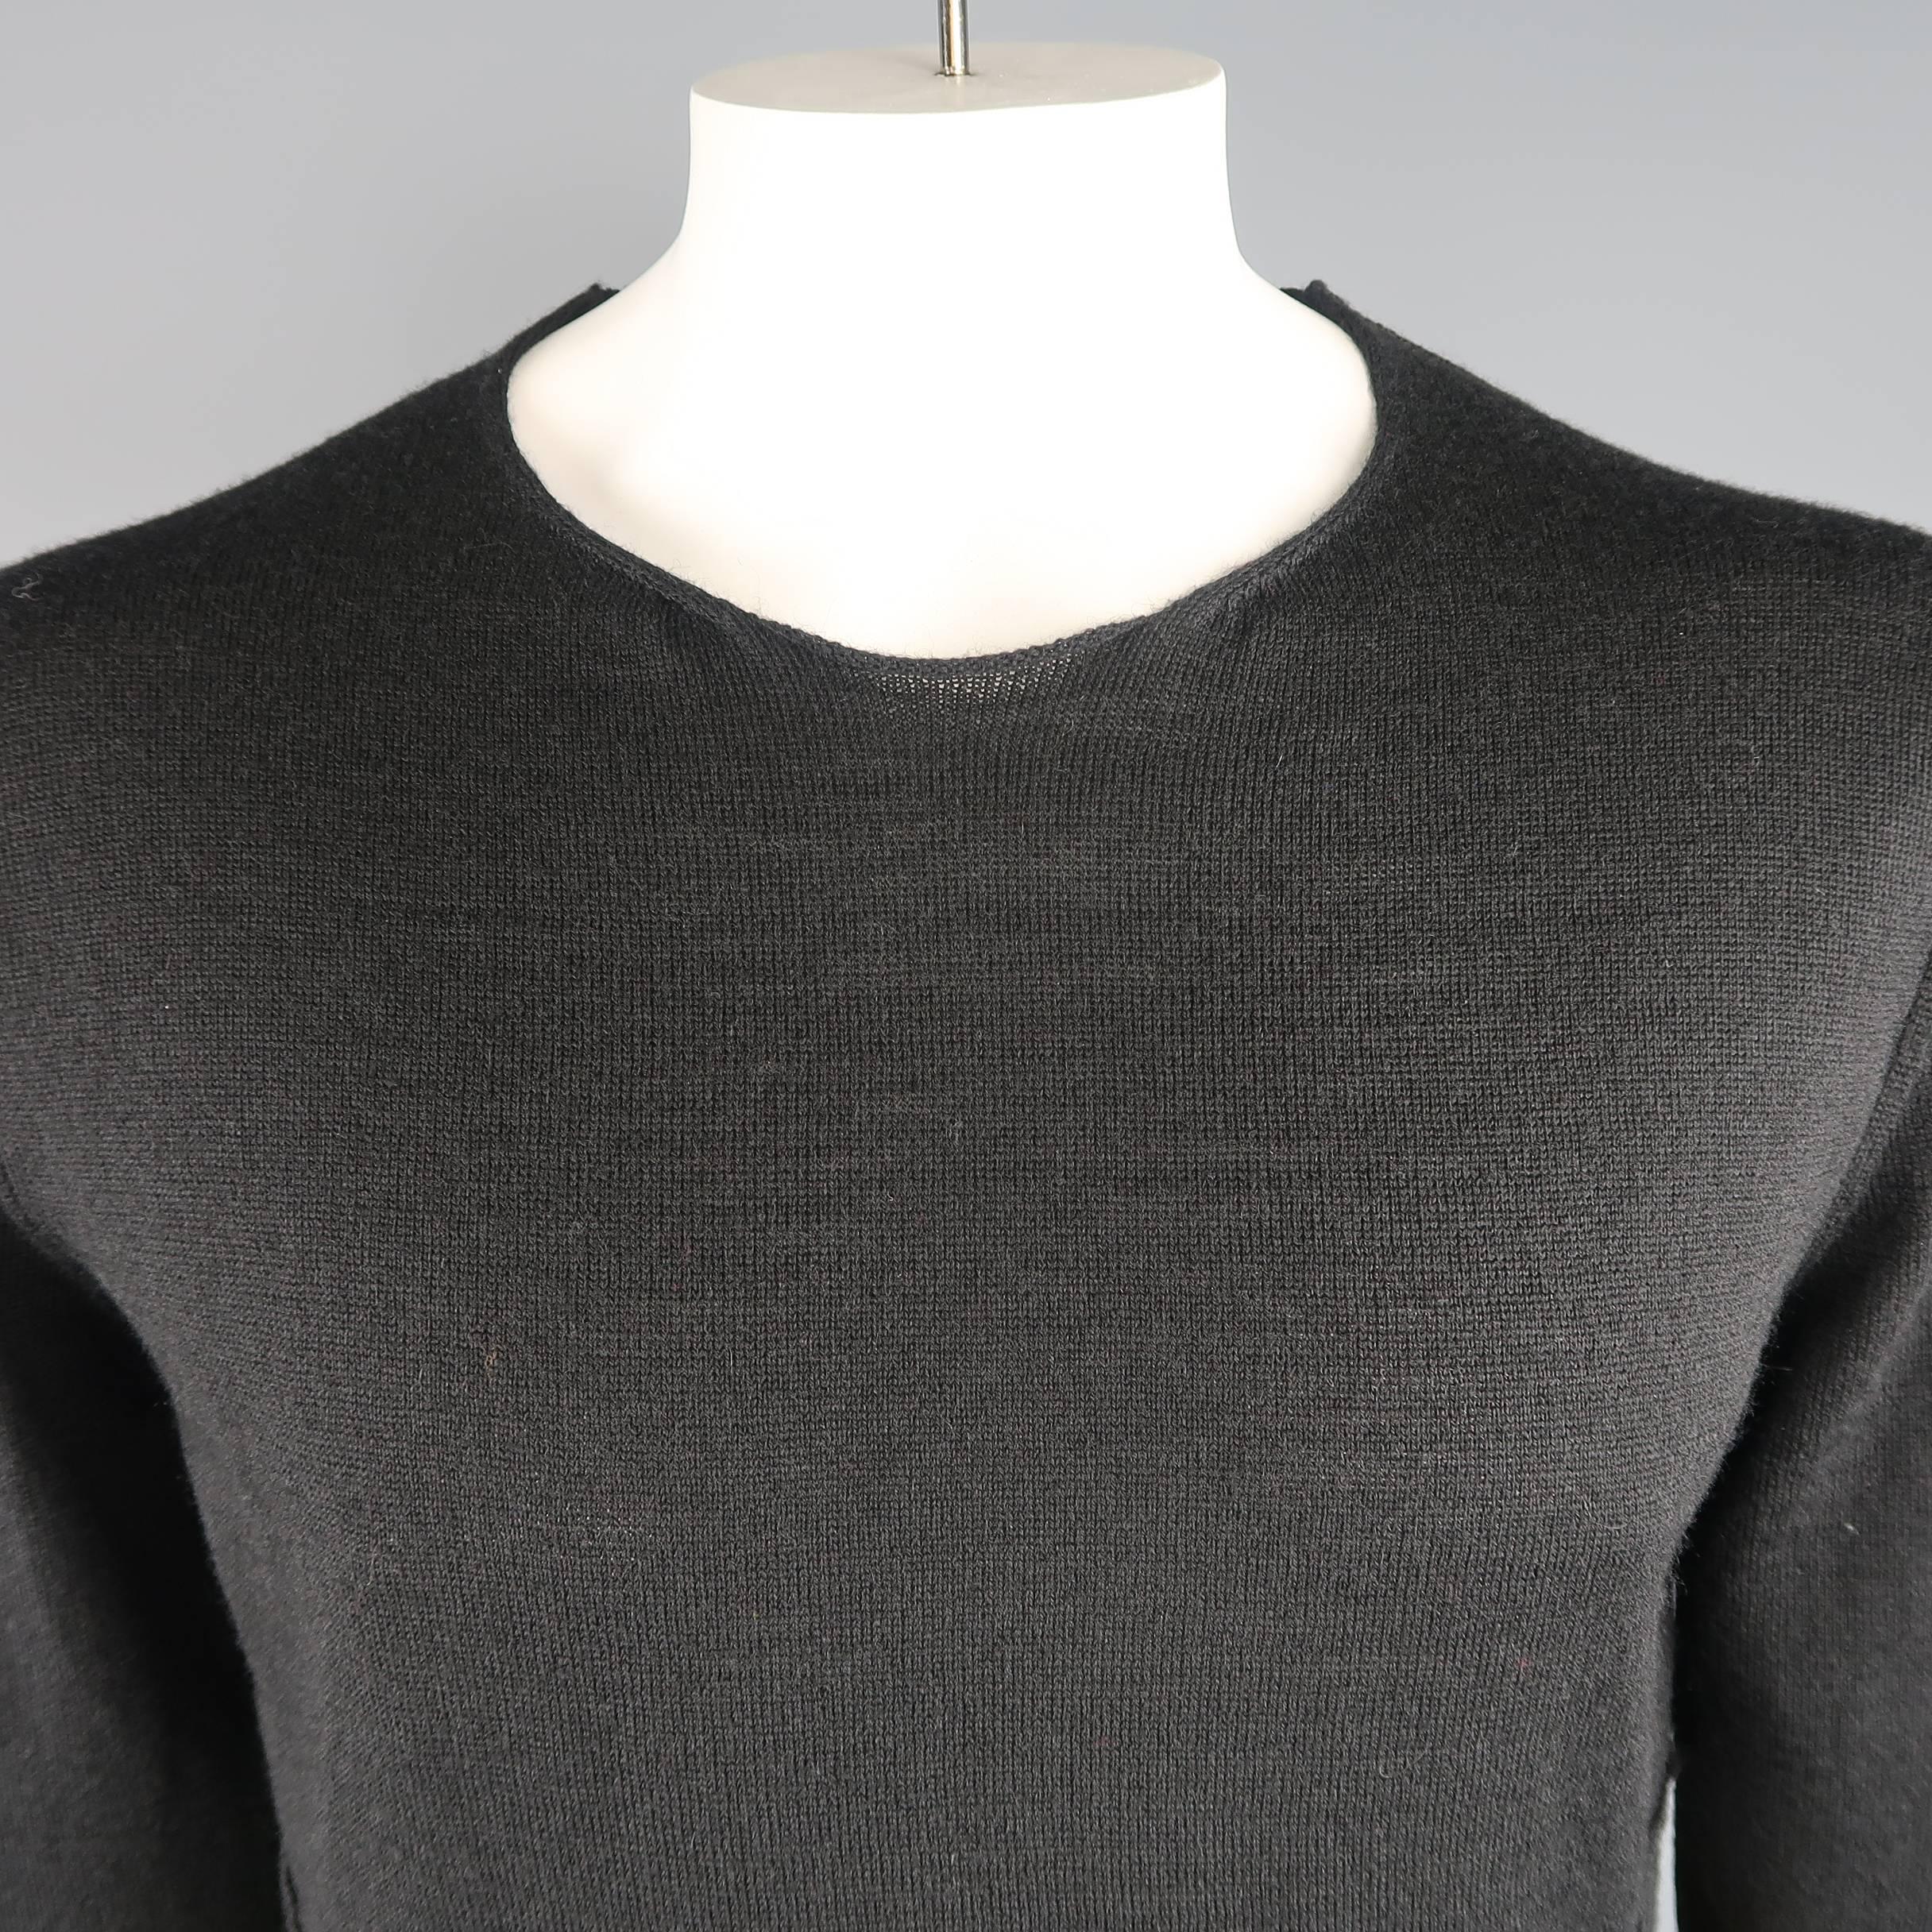 COMME des GARCONS SHIRT pullover sweater comes in black wool blend knit with a round neck and multi color striped pattern bottom panel with cutouts. Made in Japan.
 
Excellent Pre-Owned Condition.
Marked: X
 
Measurements:
 
Shoulder: 19 in.
Chest: